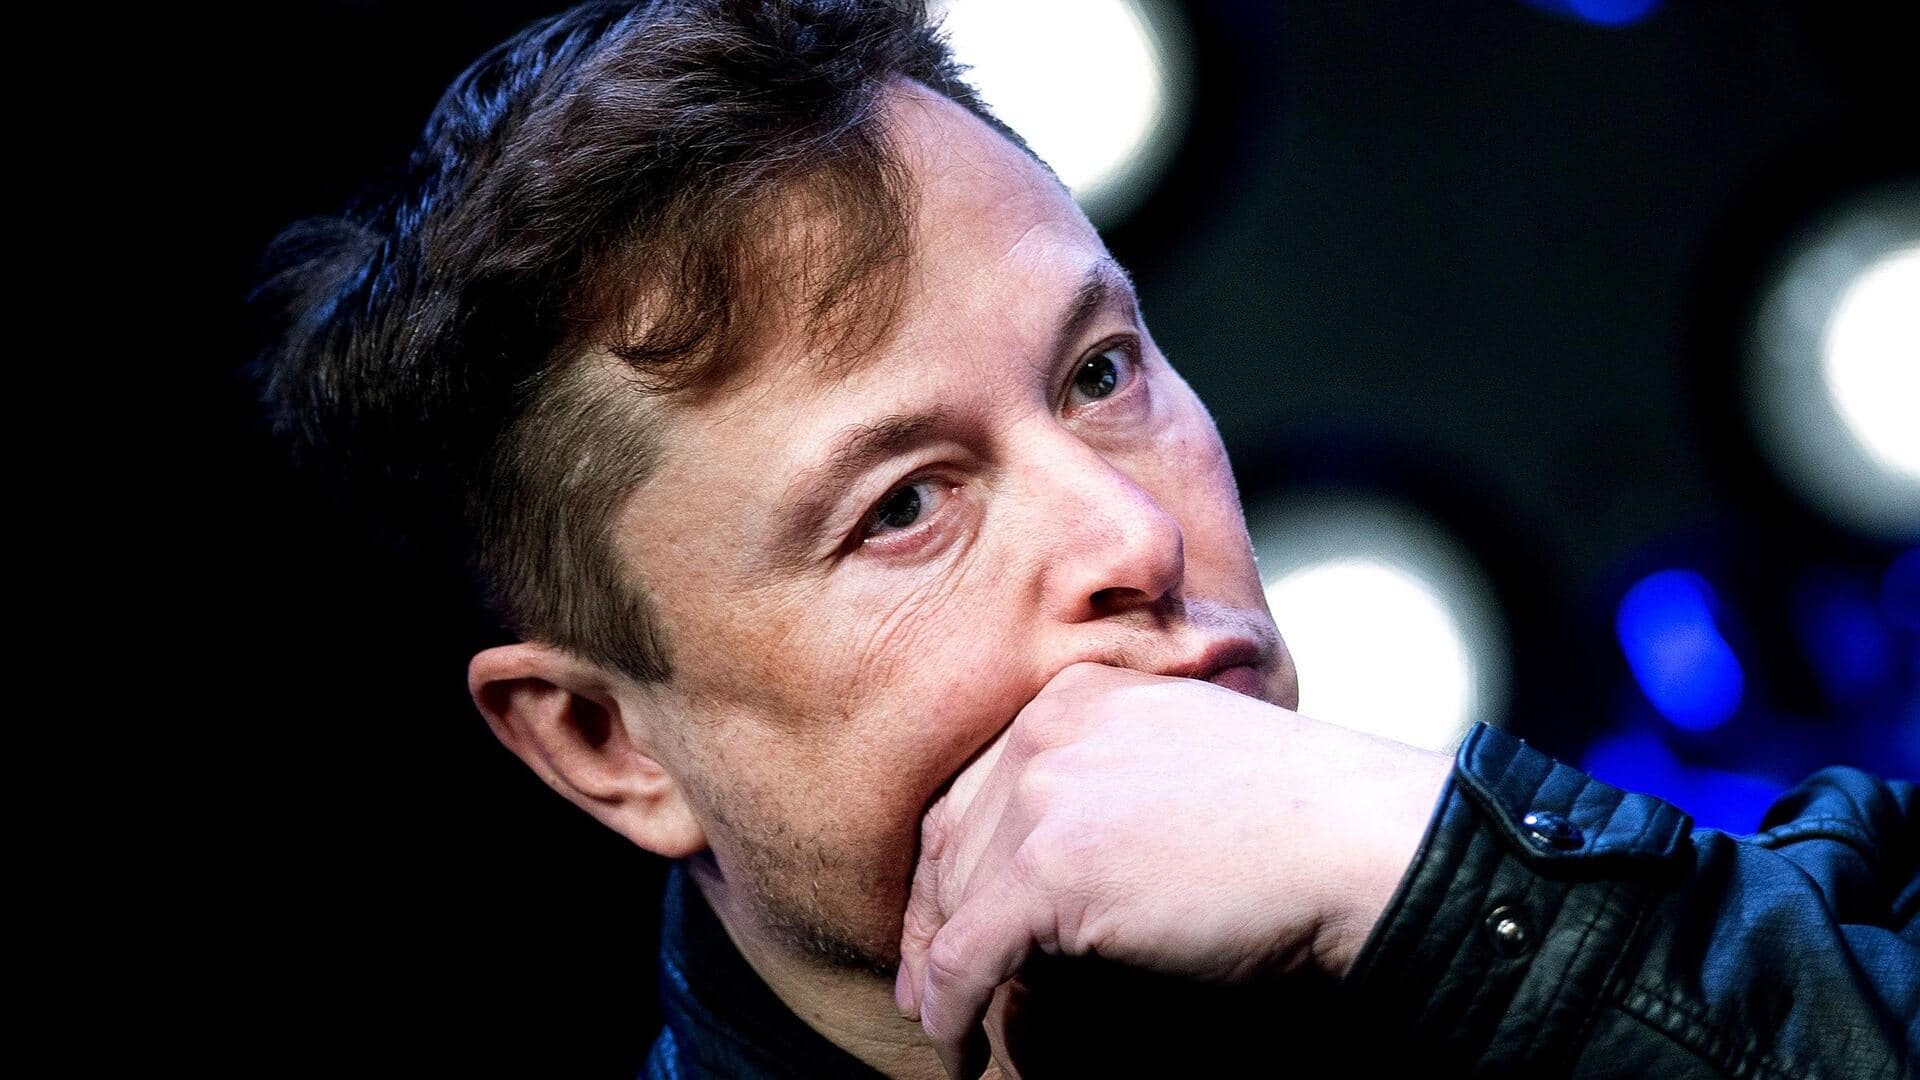 Elon Musk says using ketamine helps manage 'negative chemical state'